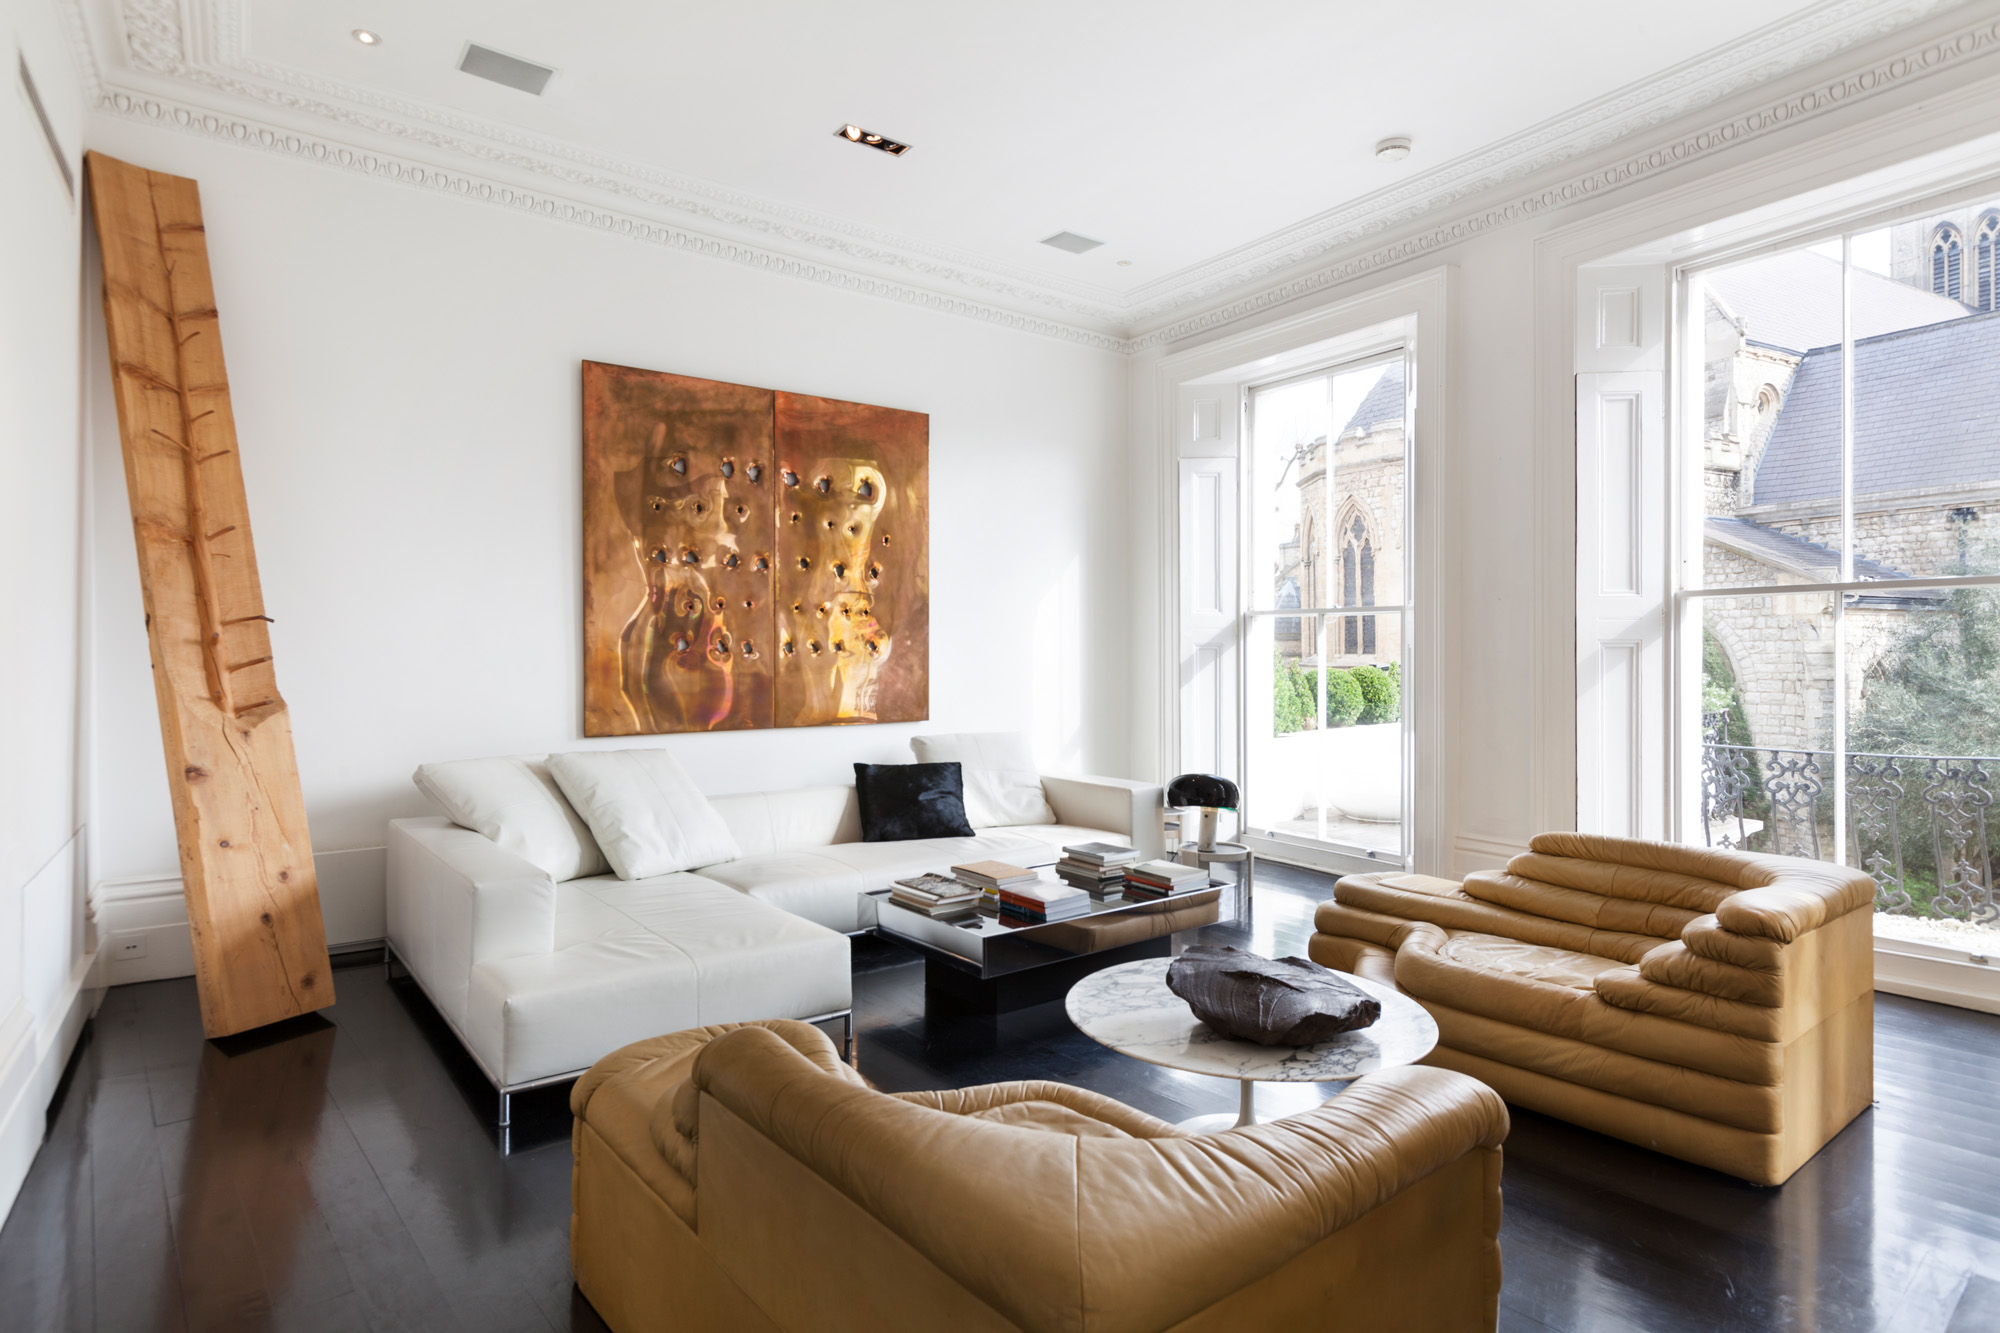 For Sale: St Stephen&#039;s Crescent Notting Hill W11 contemporary interior design in luxury reception room